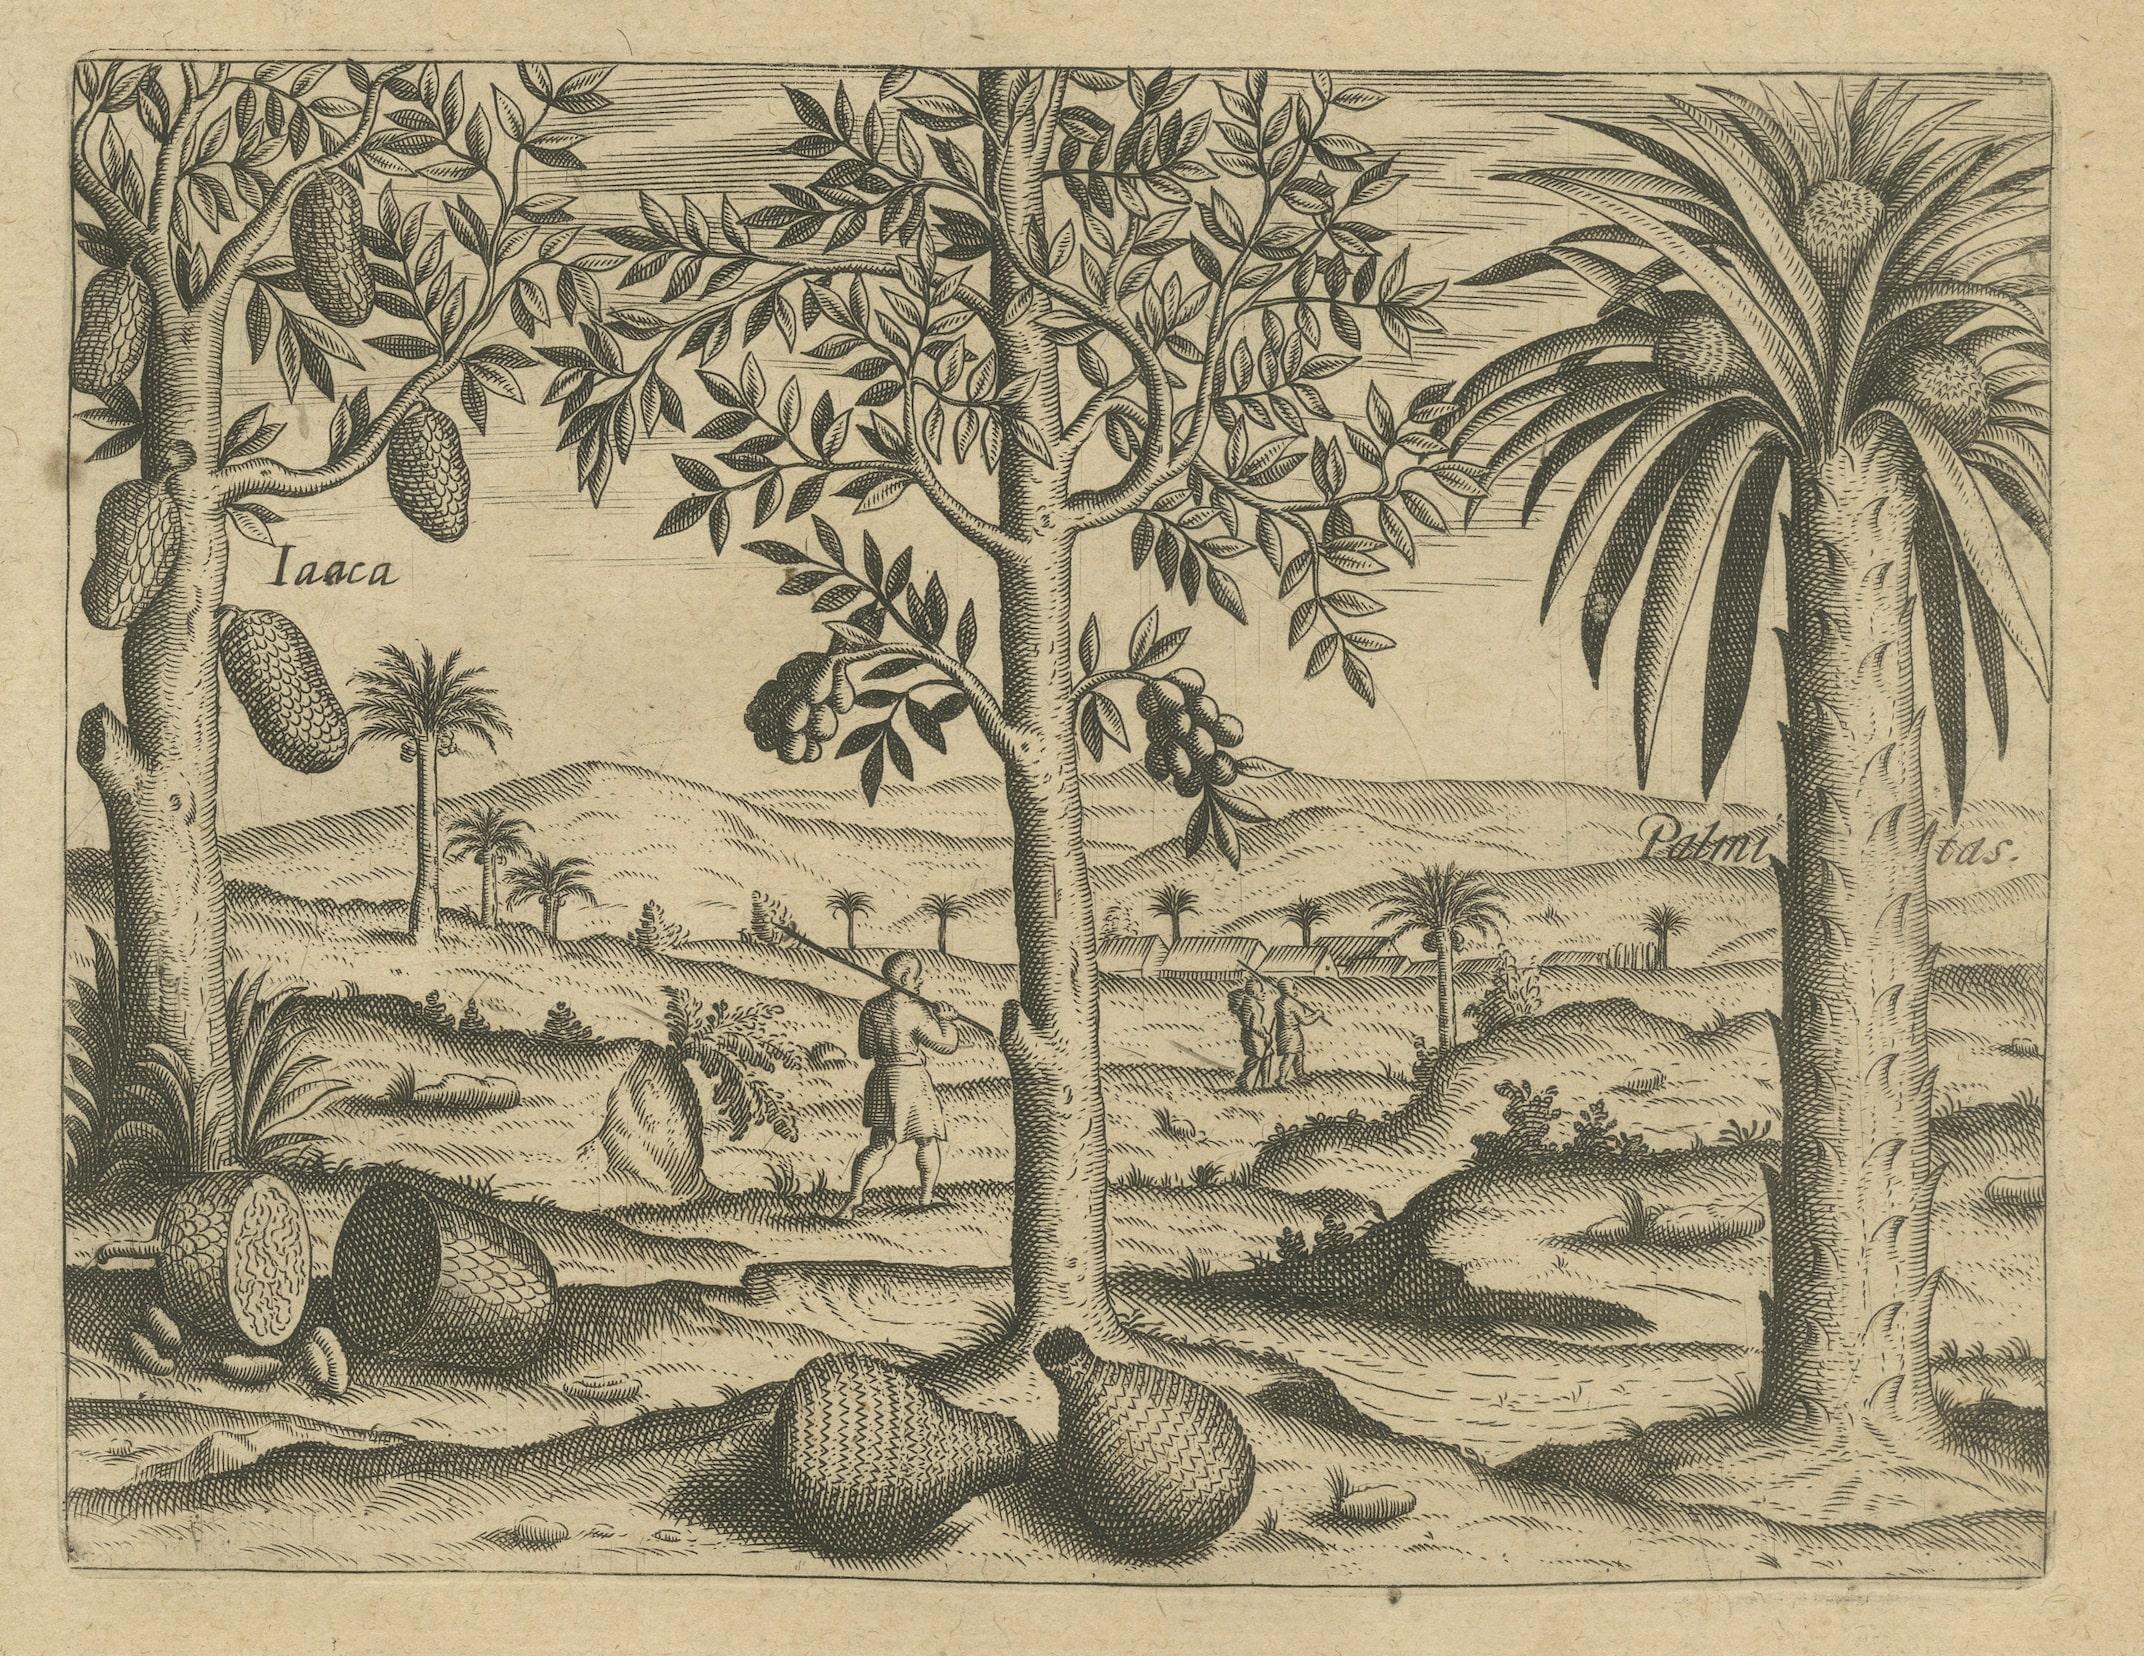 Engraved Tropical Abundance: The Jackfruit and Palm Trees in De Bry's 1601 Engraving For Sale